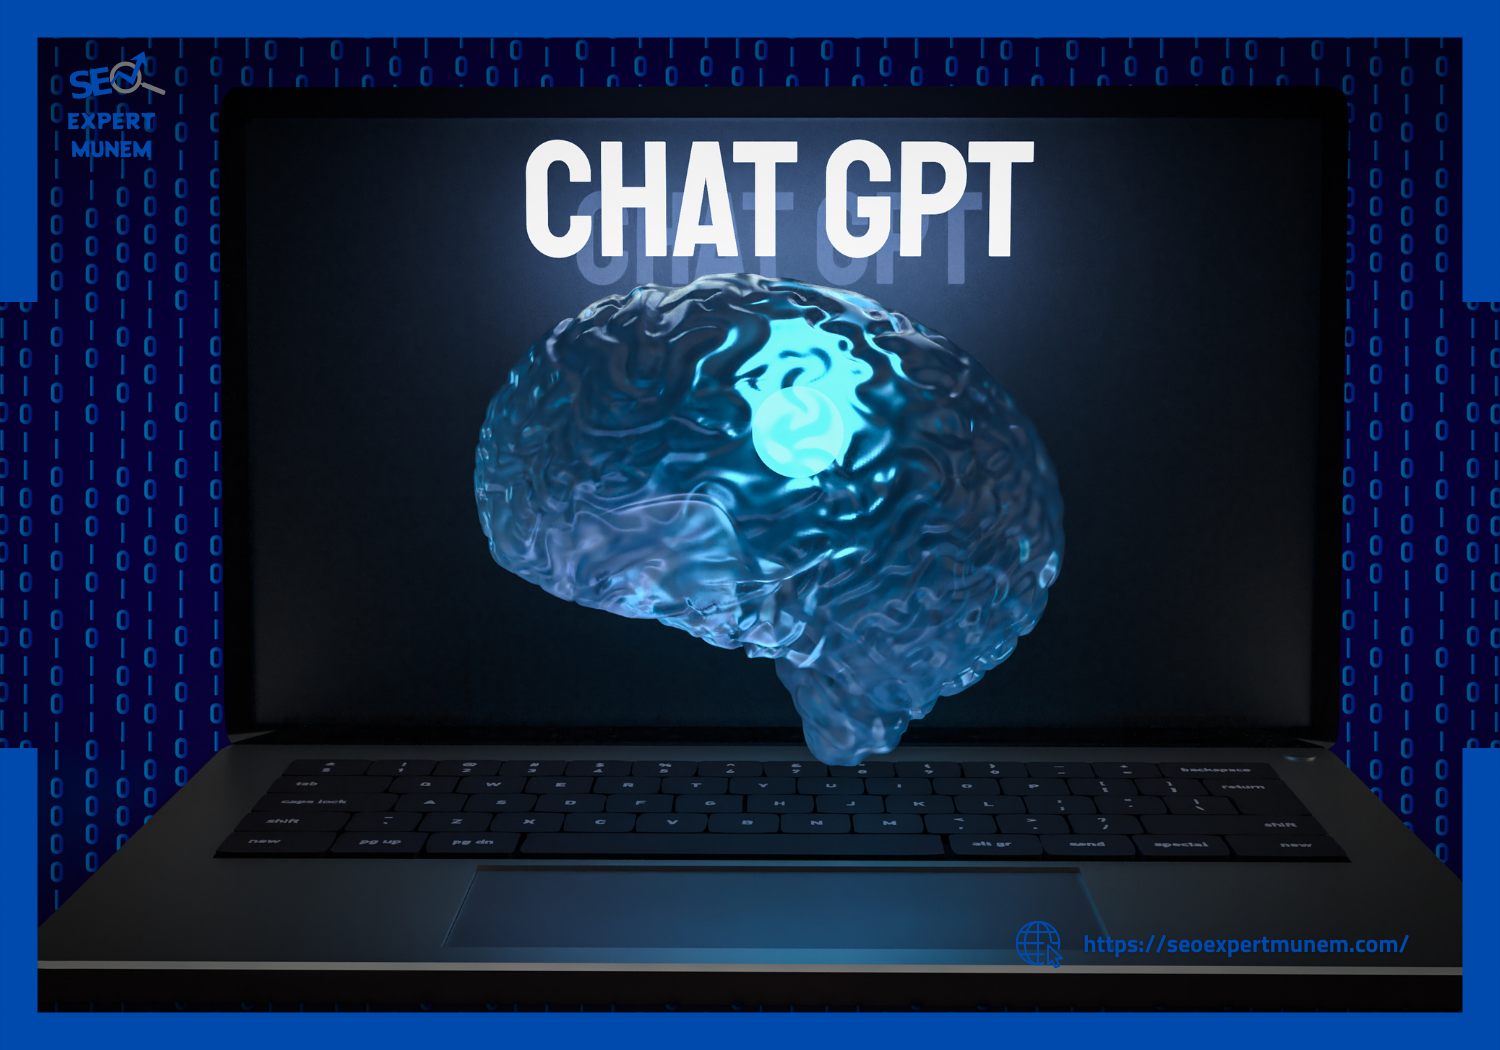 What Can ChatGPT Do?